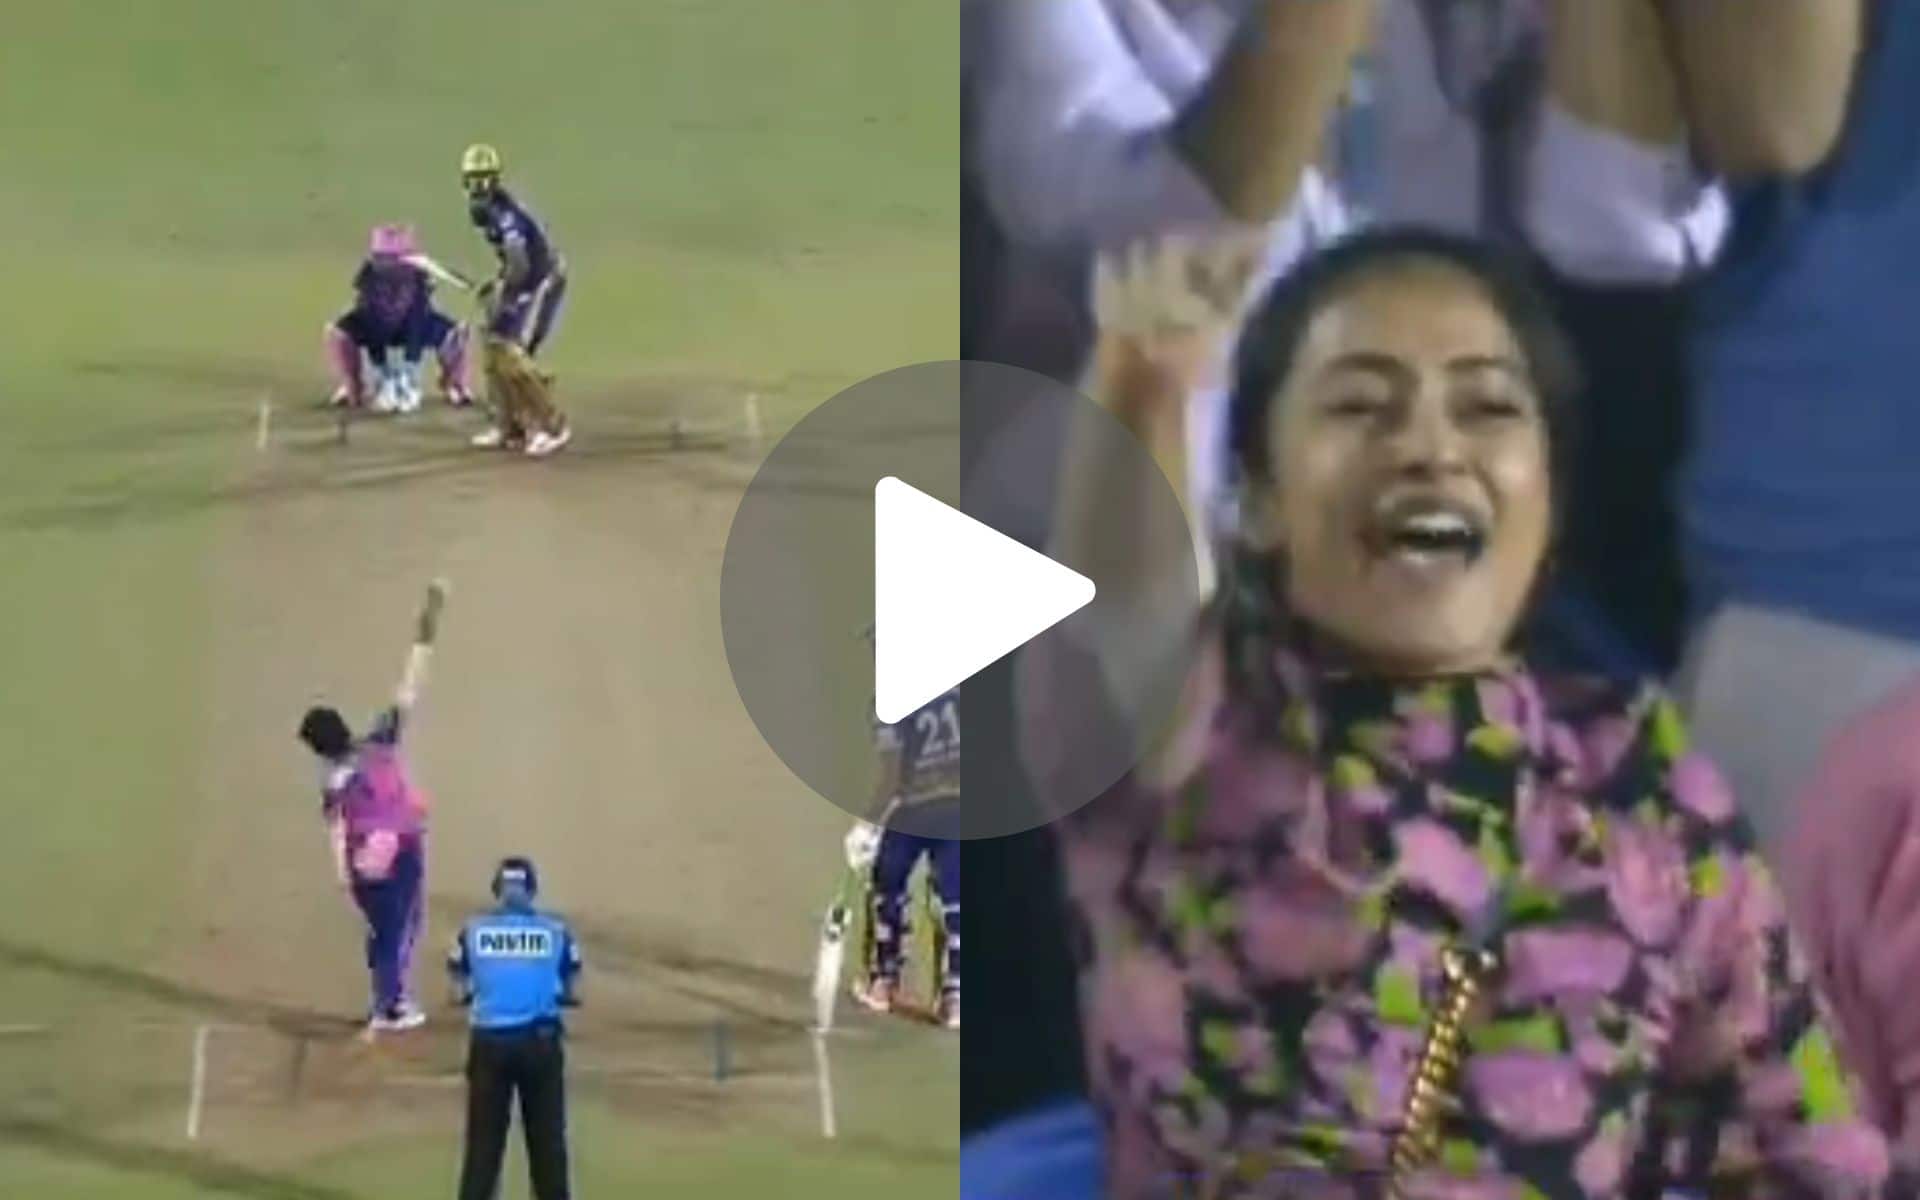 [Watch] When Dhanashree Verma Left Ecstatic After Chahal’s Hat-Trick In IPL 2022